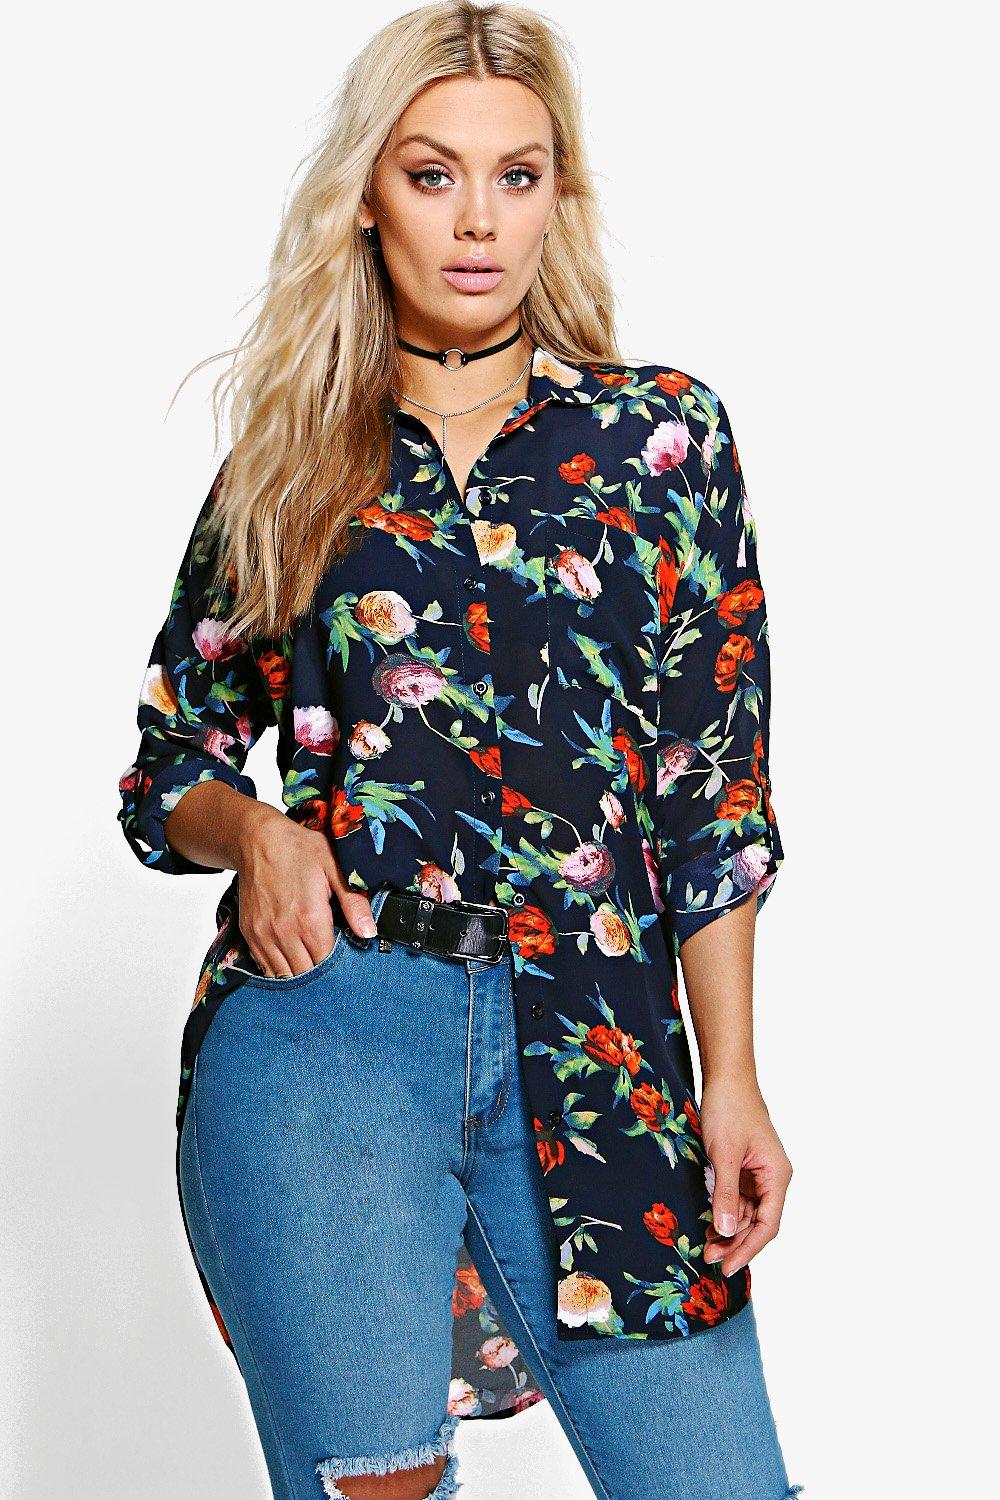 Plus Soph Oversized Floral Shirt at boohoo.com